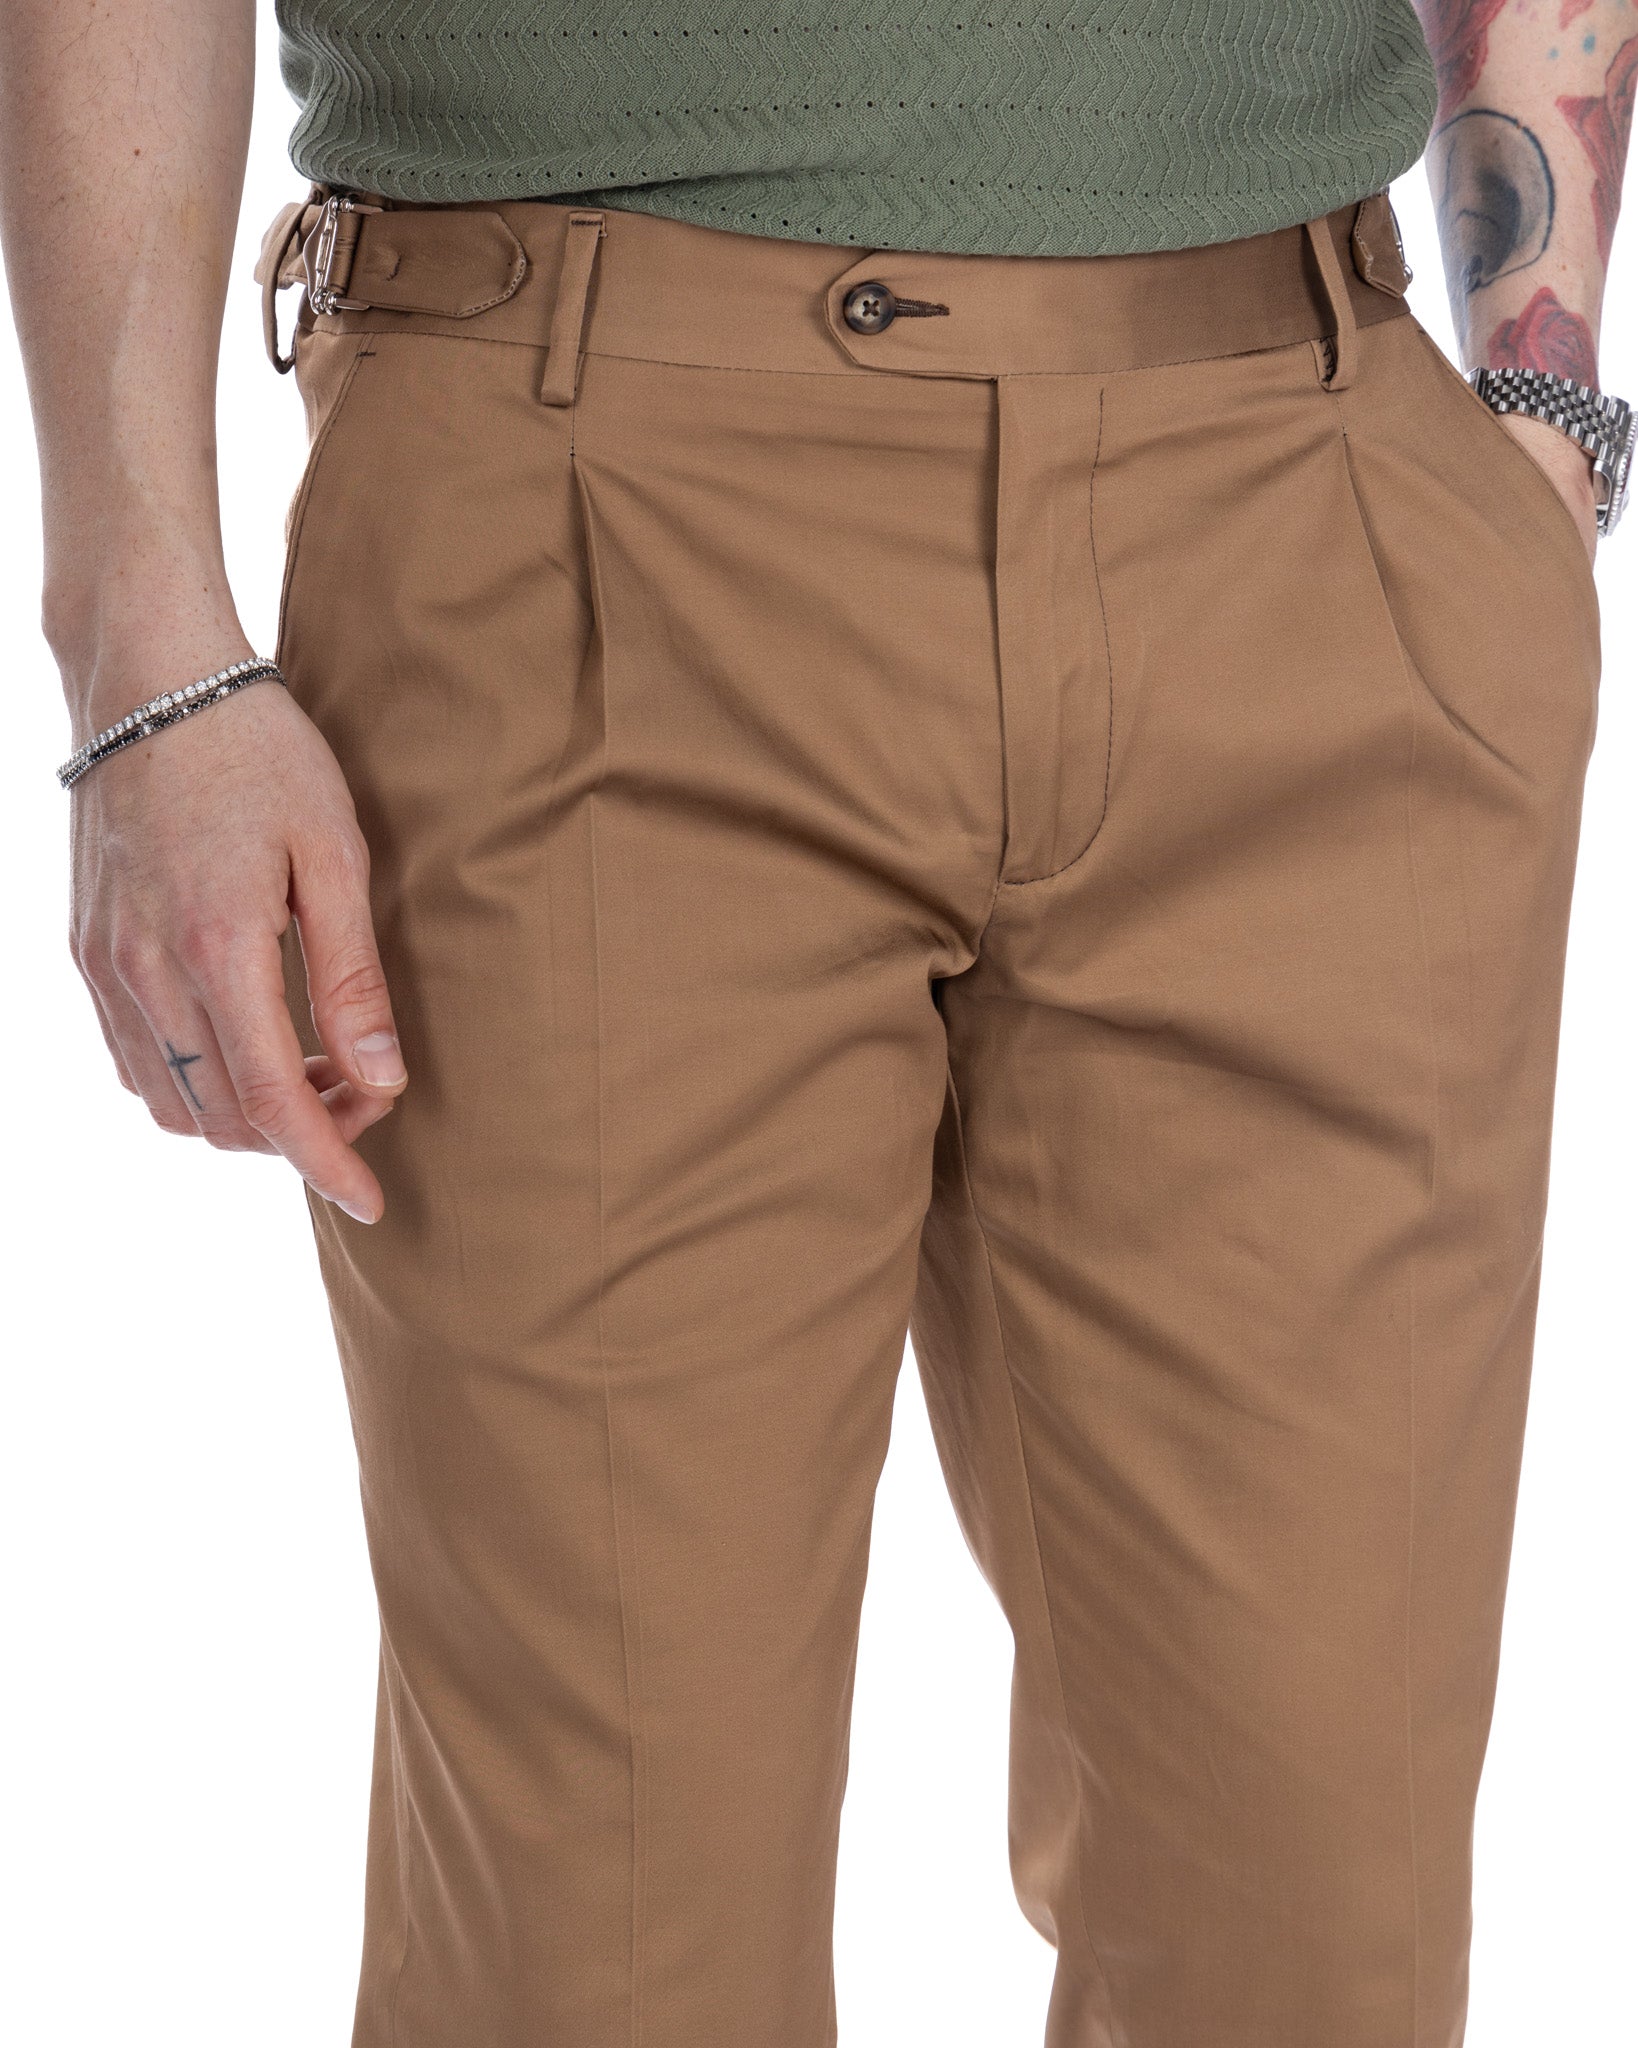 James - high waisted camel trousers with buckles